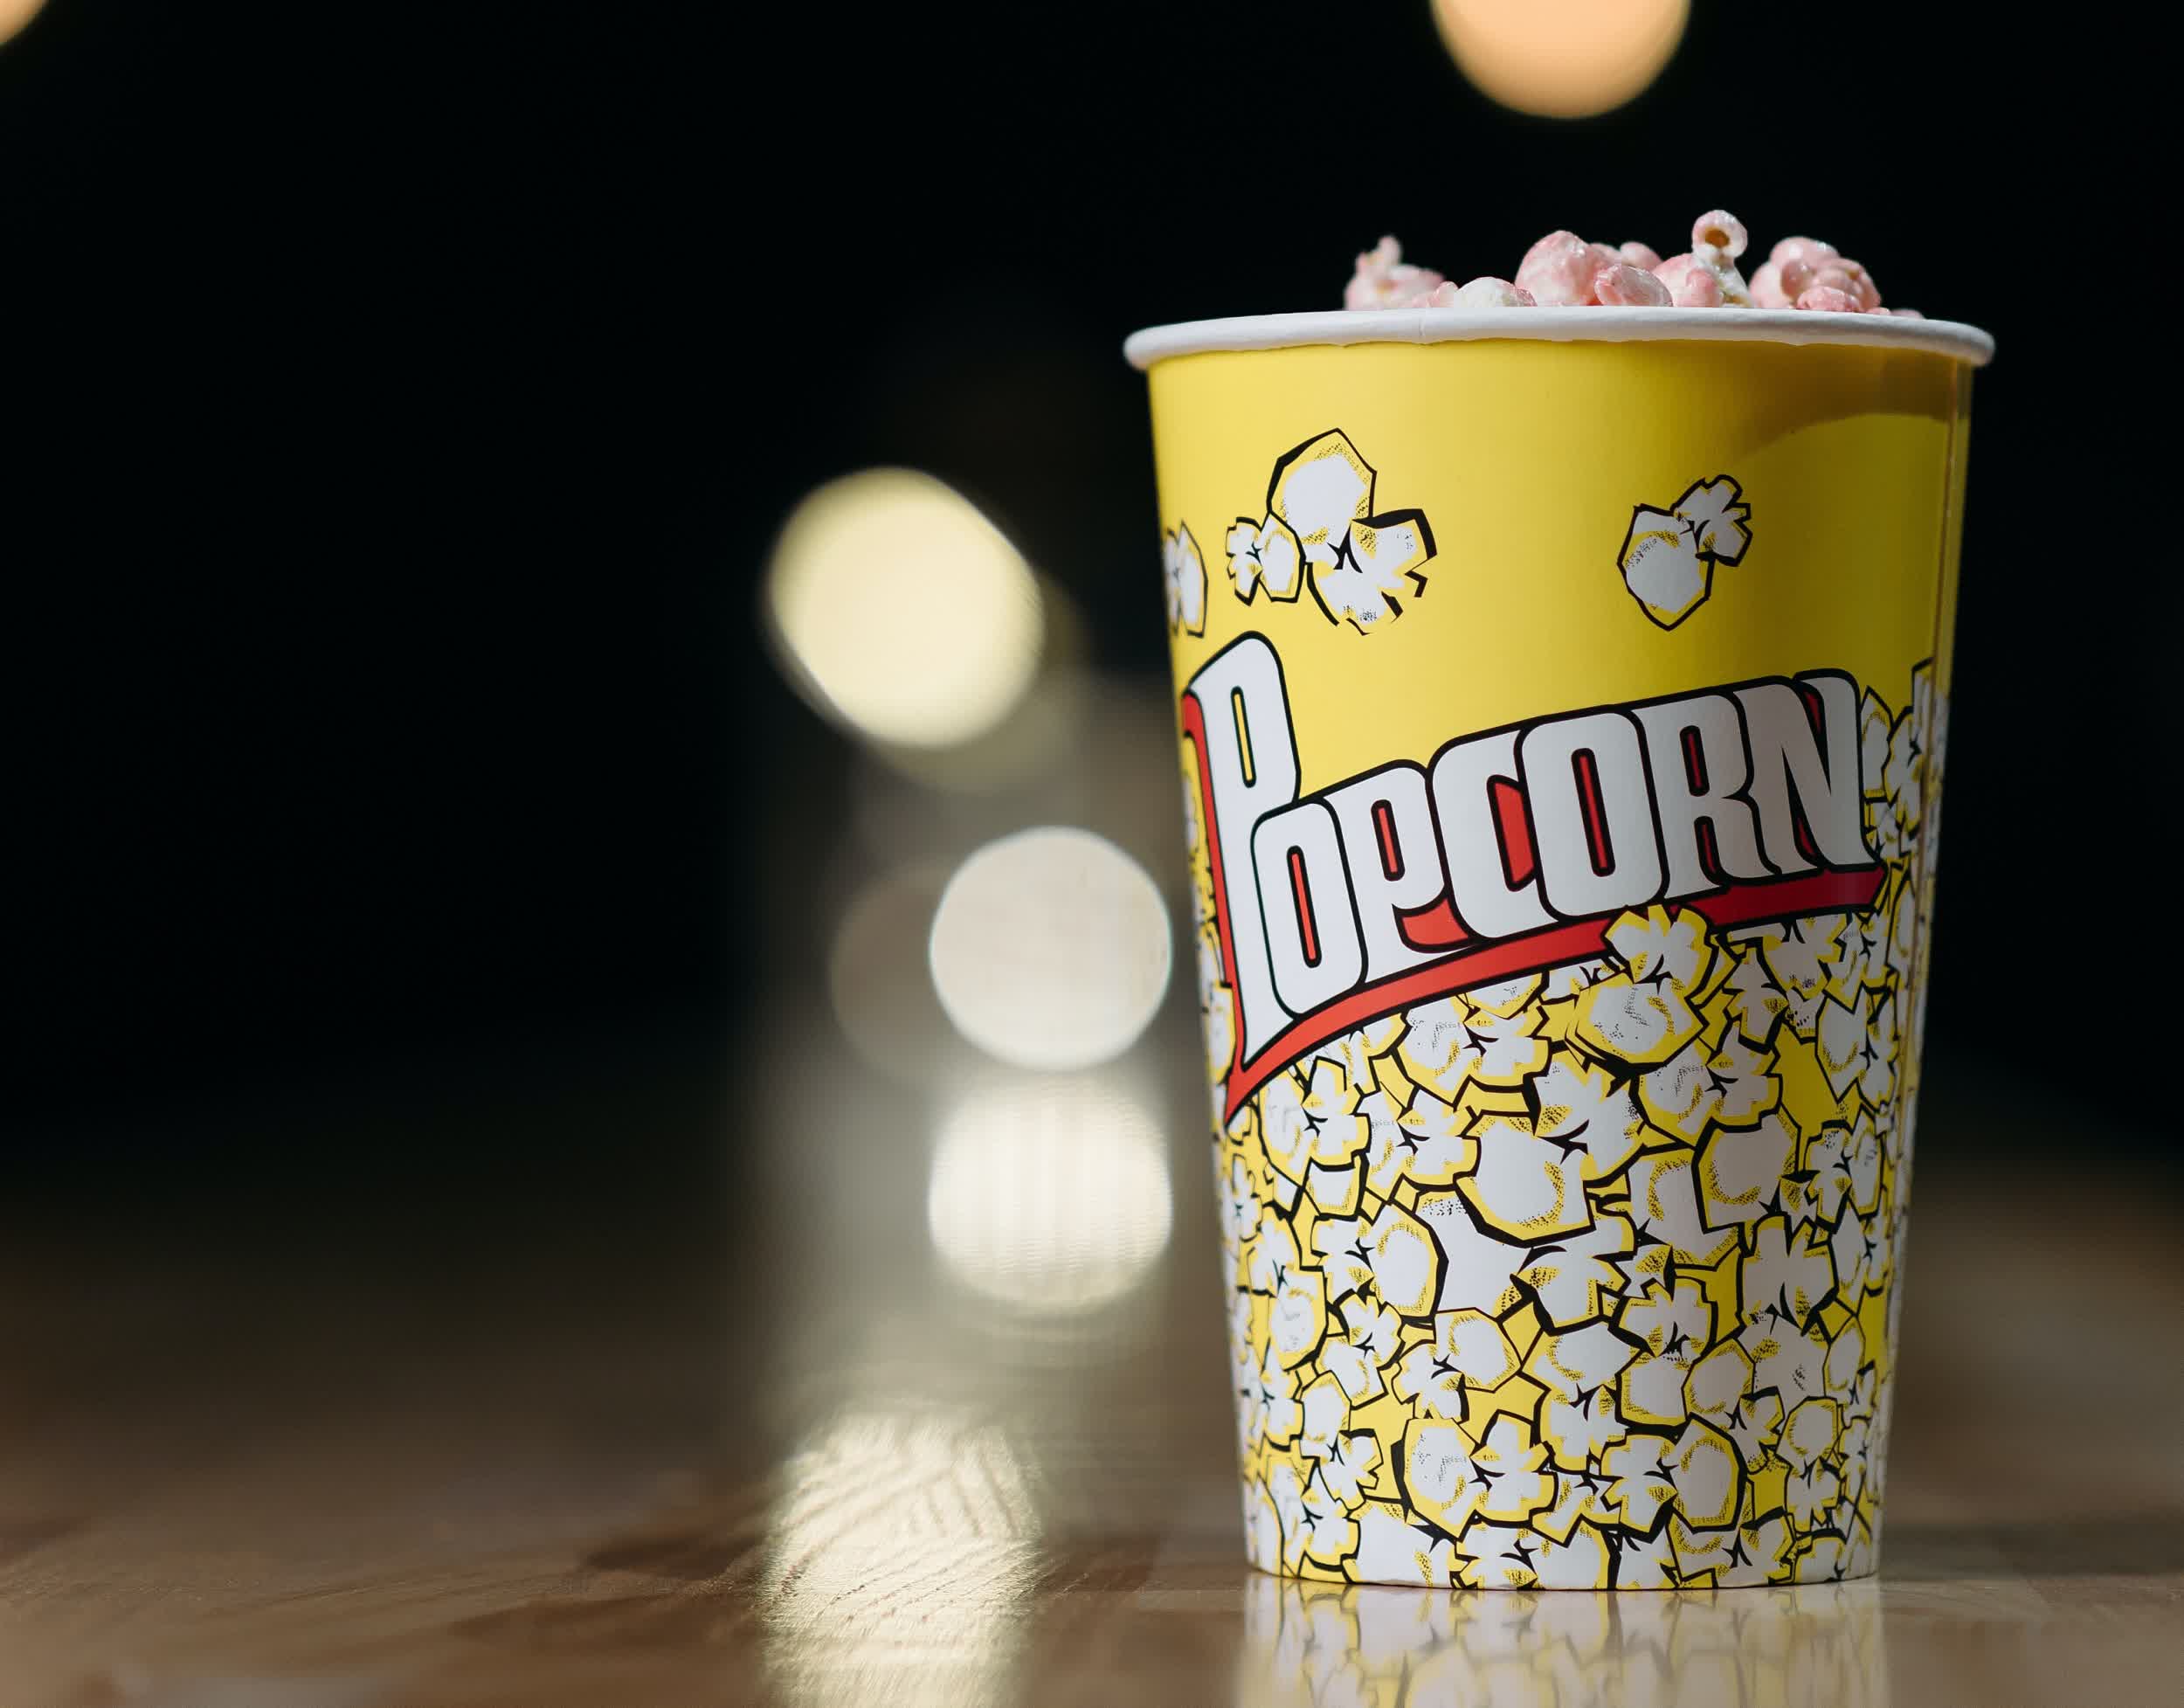 Popcorn Time shuts down on account of lack of process